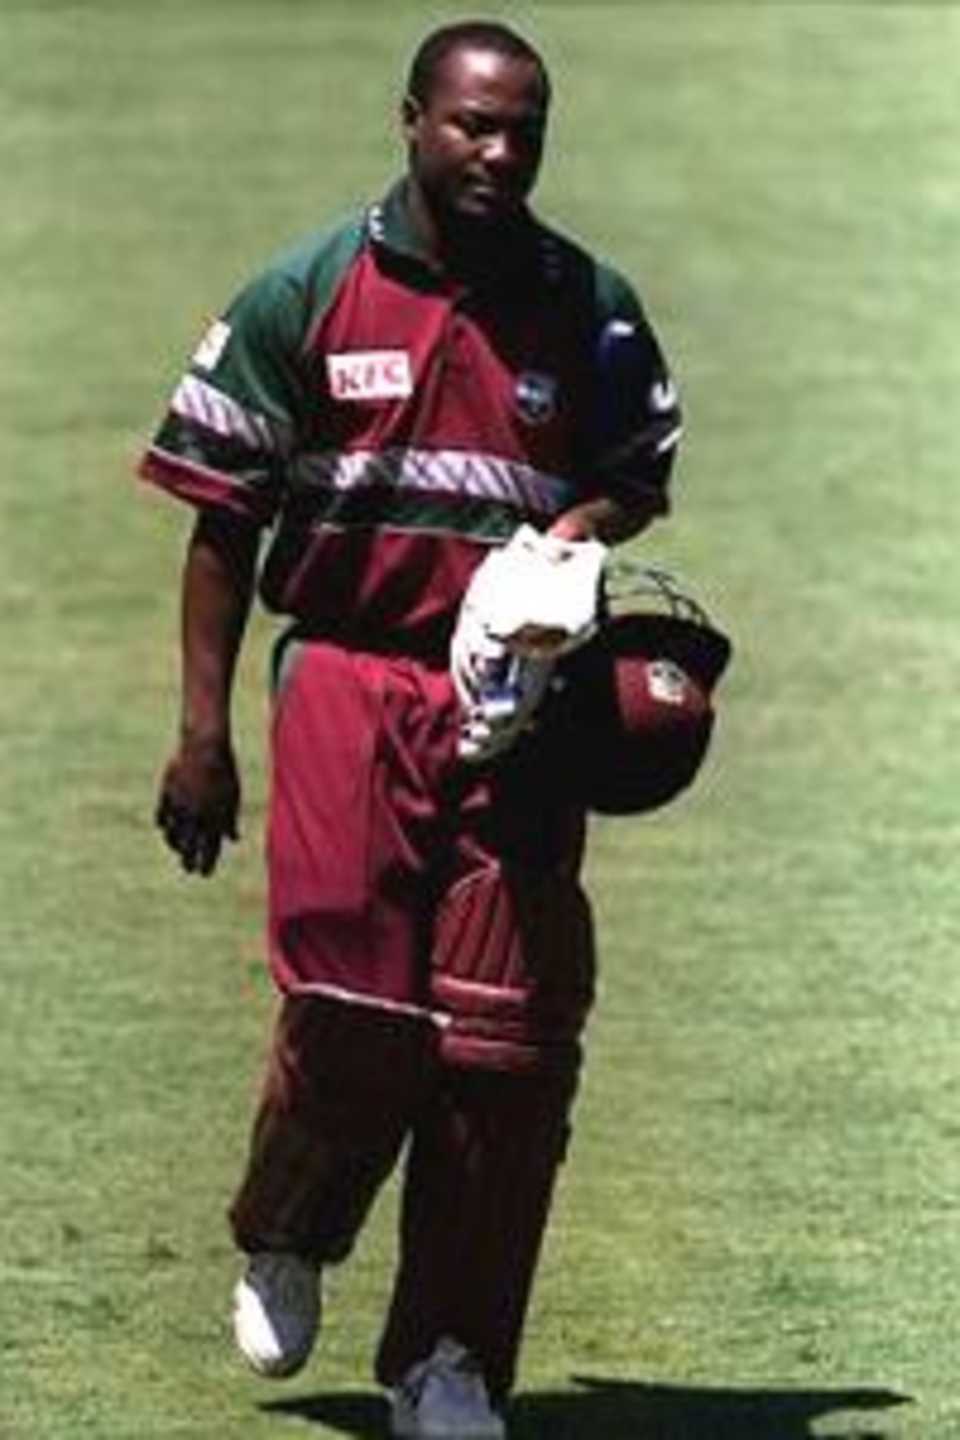 26 Jan 2001: Brian Lara of the West Indies is dismissed LBW first ball for